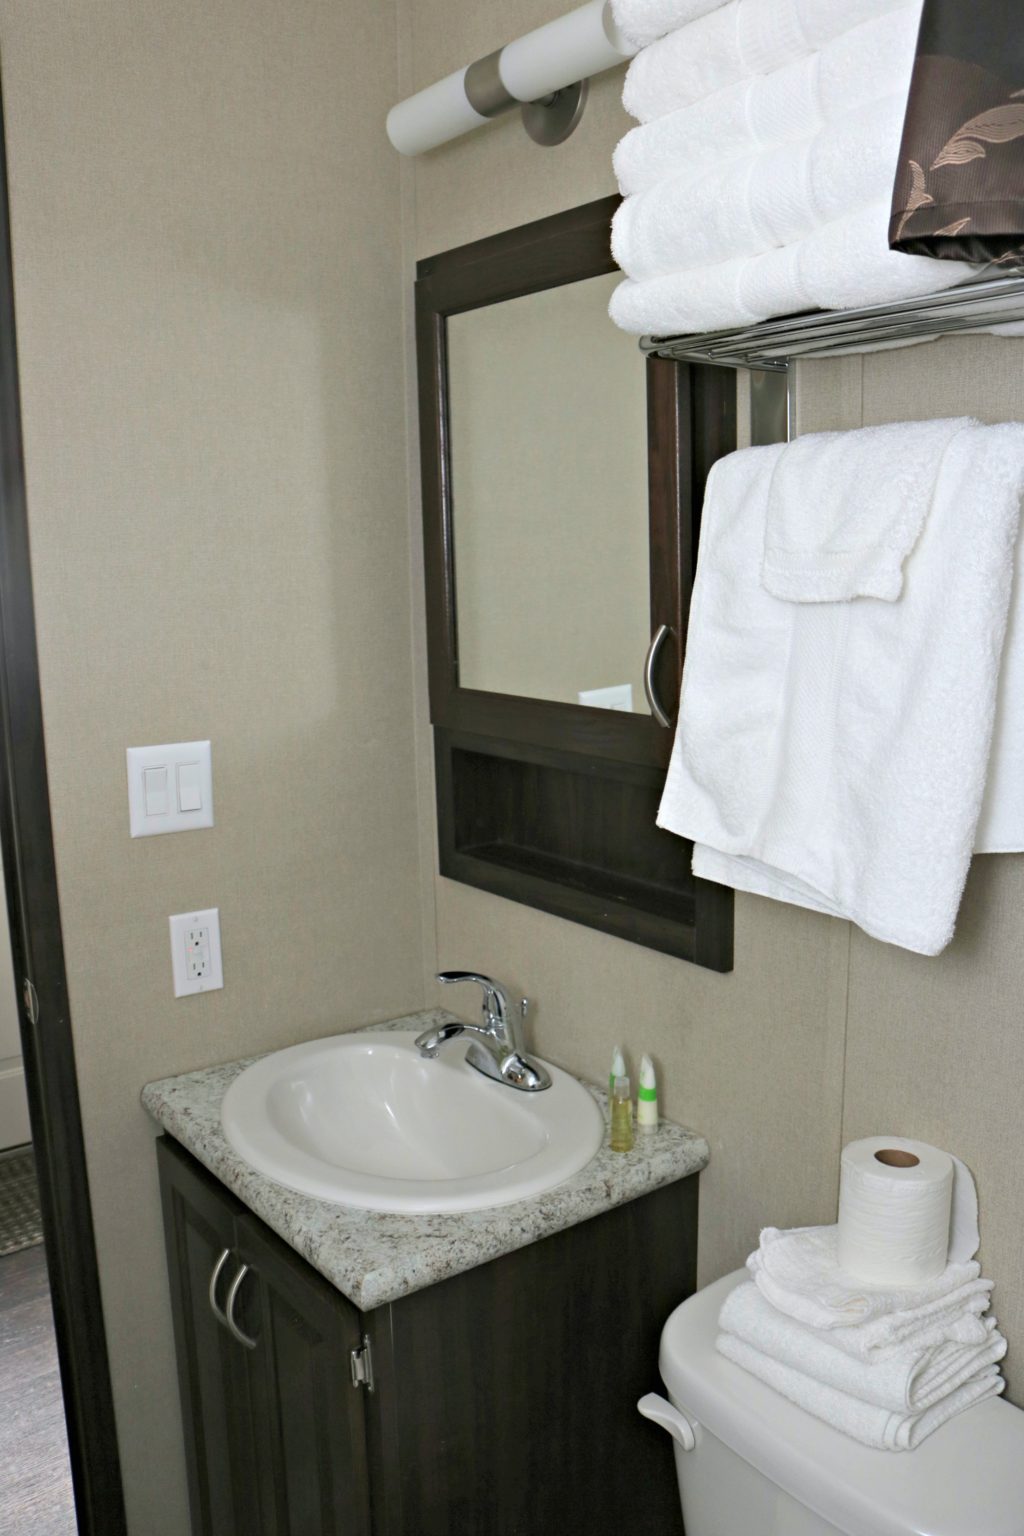 A view of the washroom and sink.